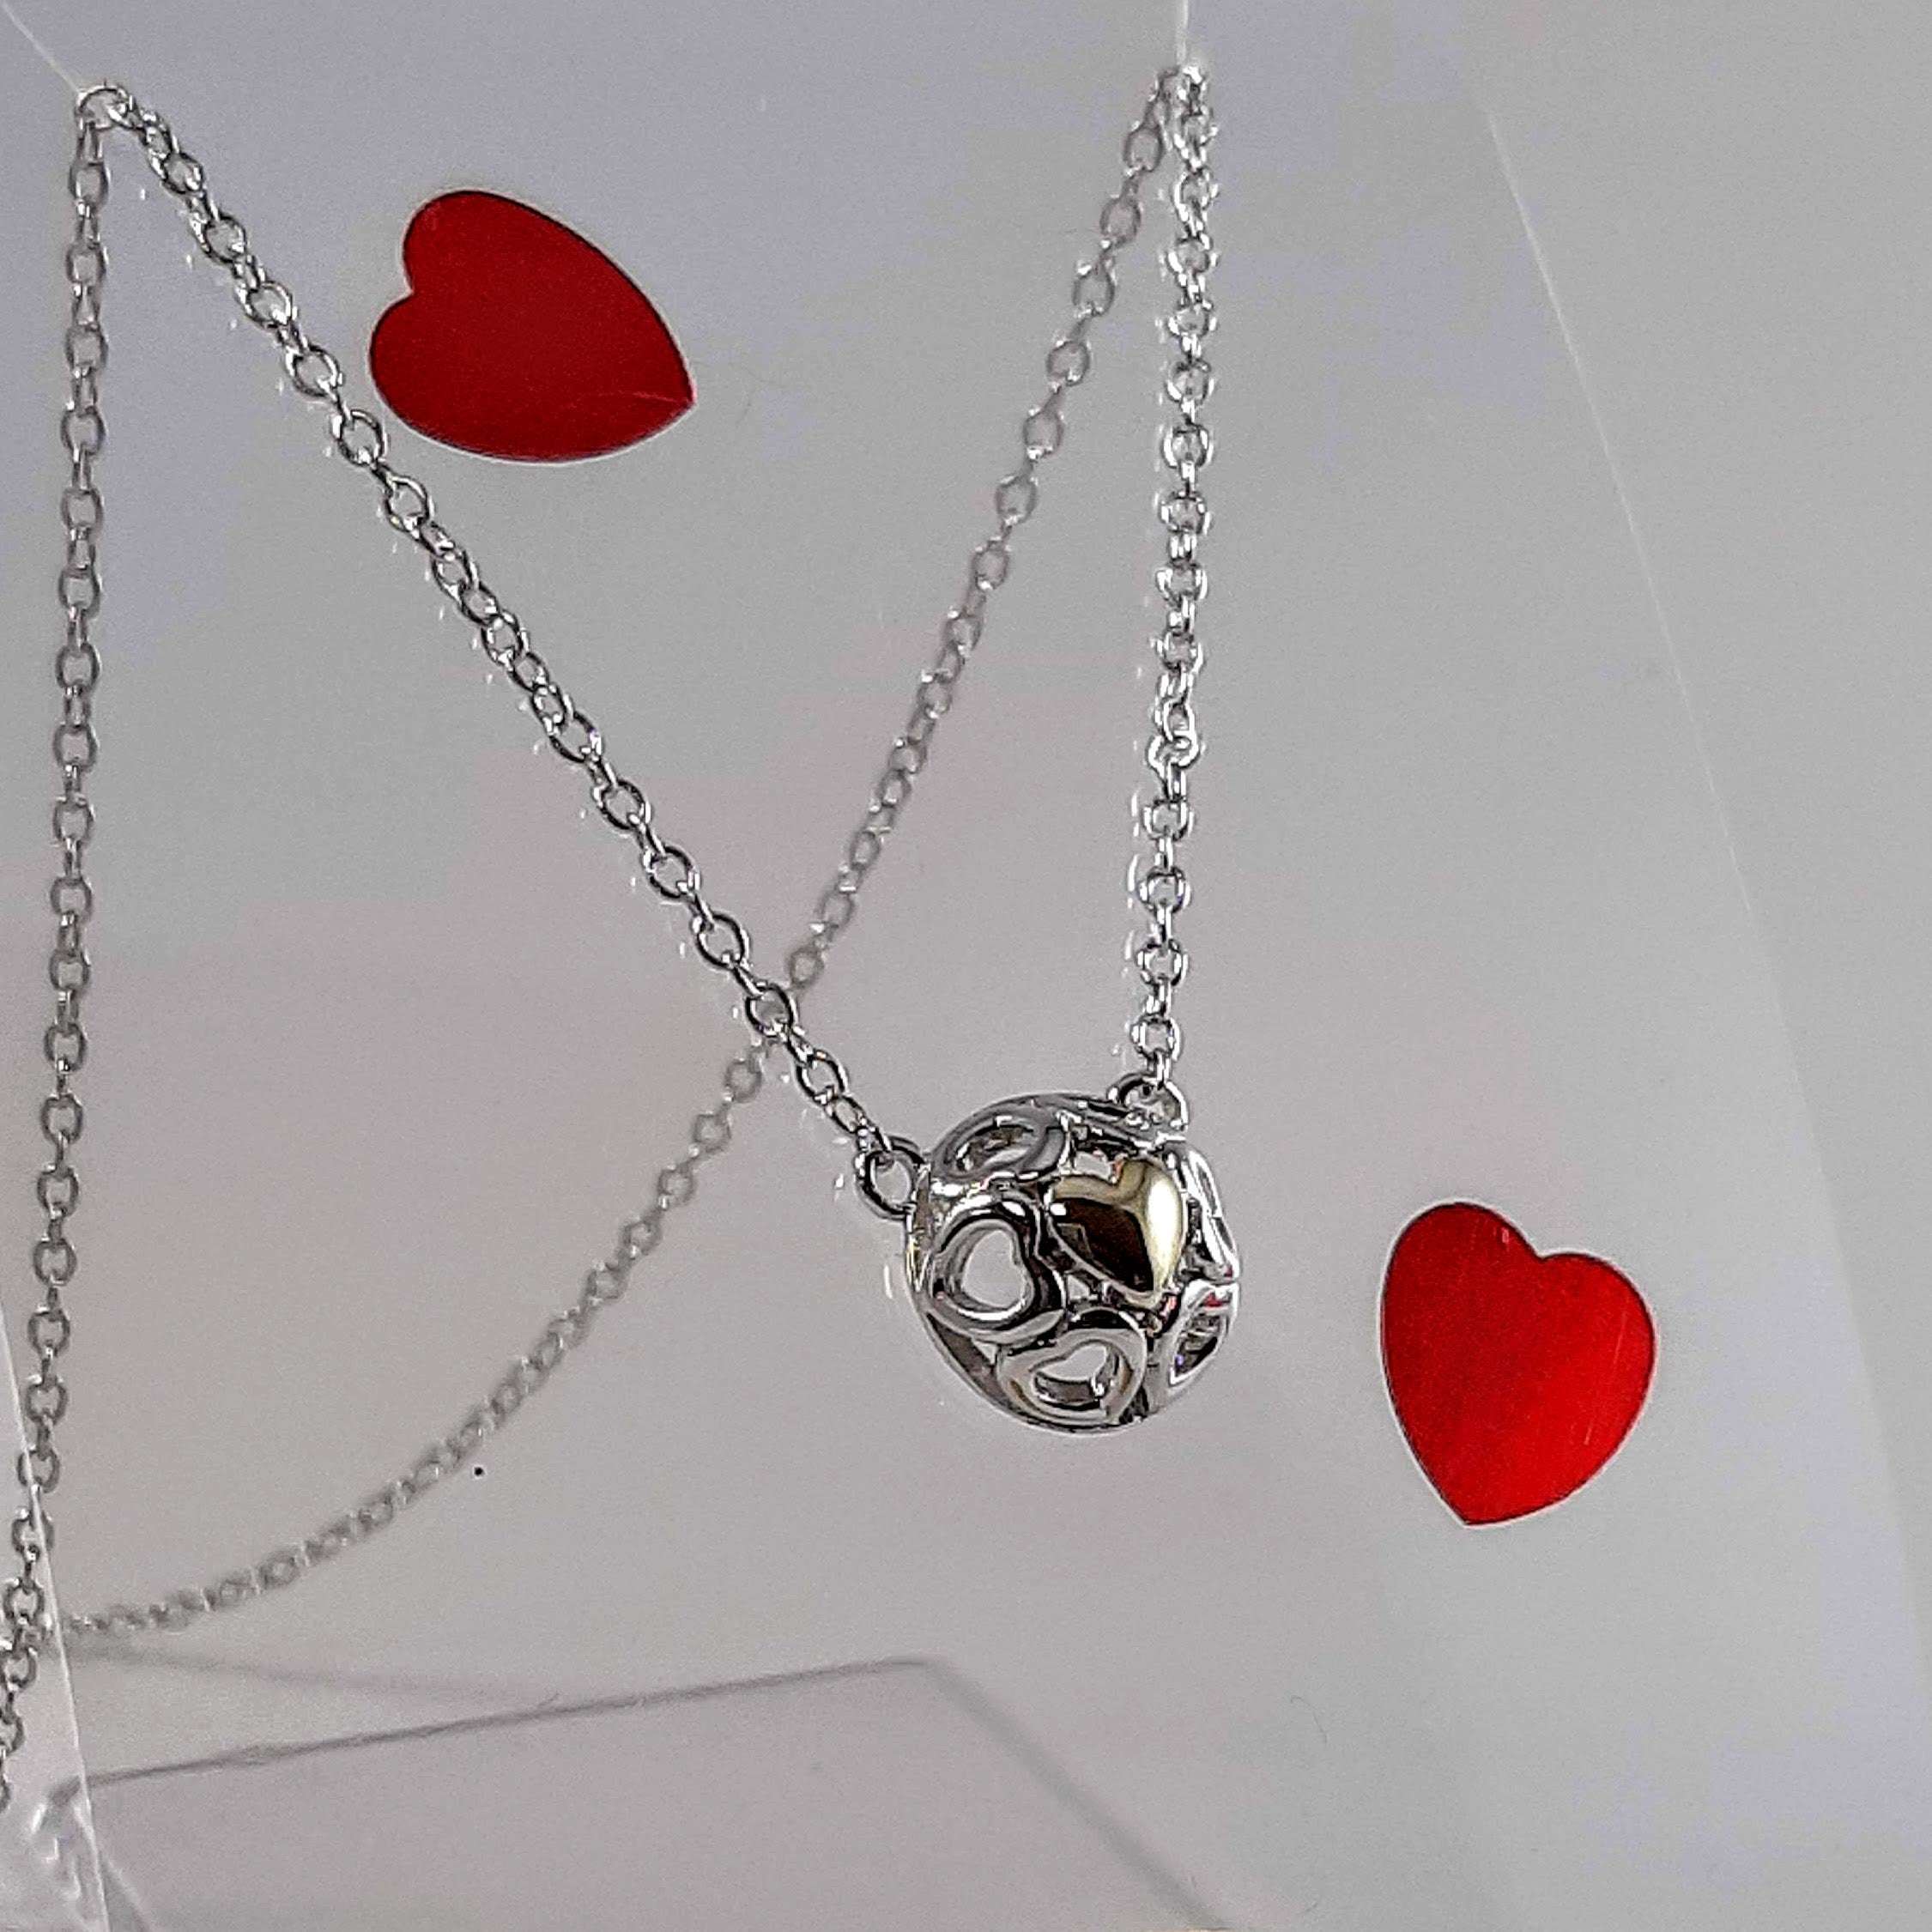 Have a Heart Sterling Silver & Rolled Gold Hearts Neckpiece